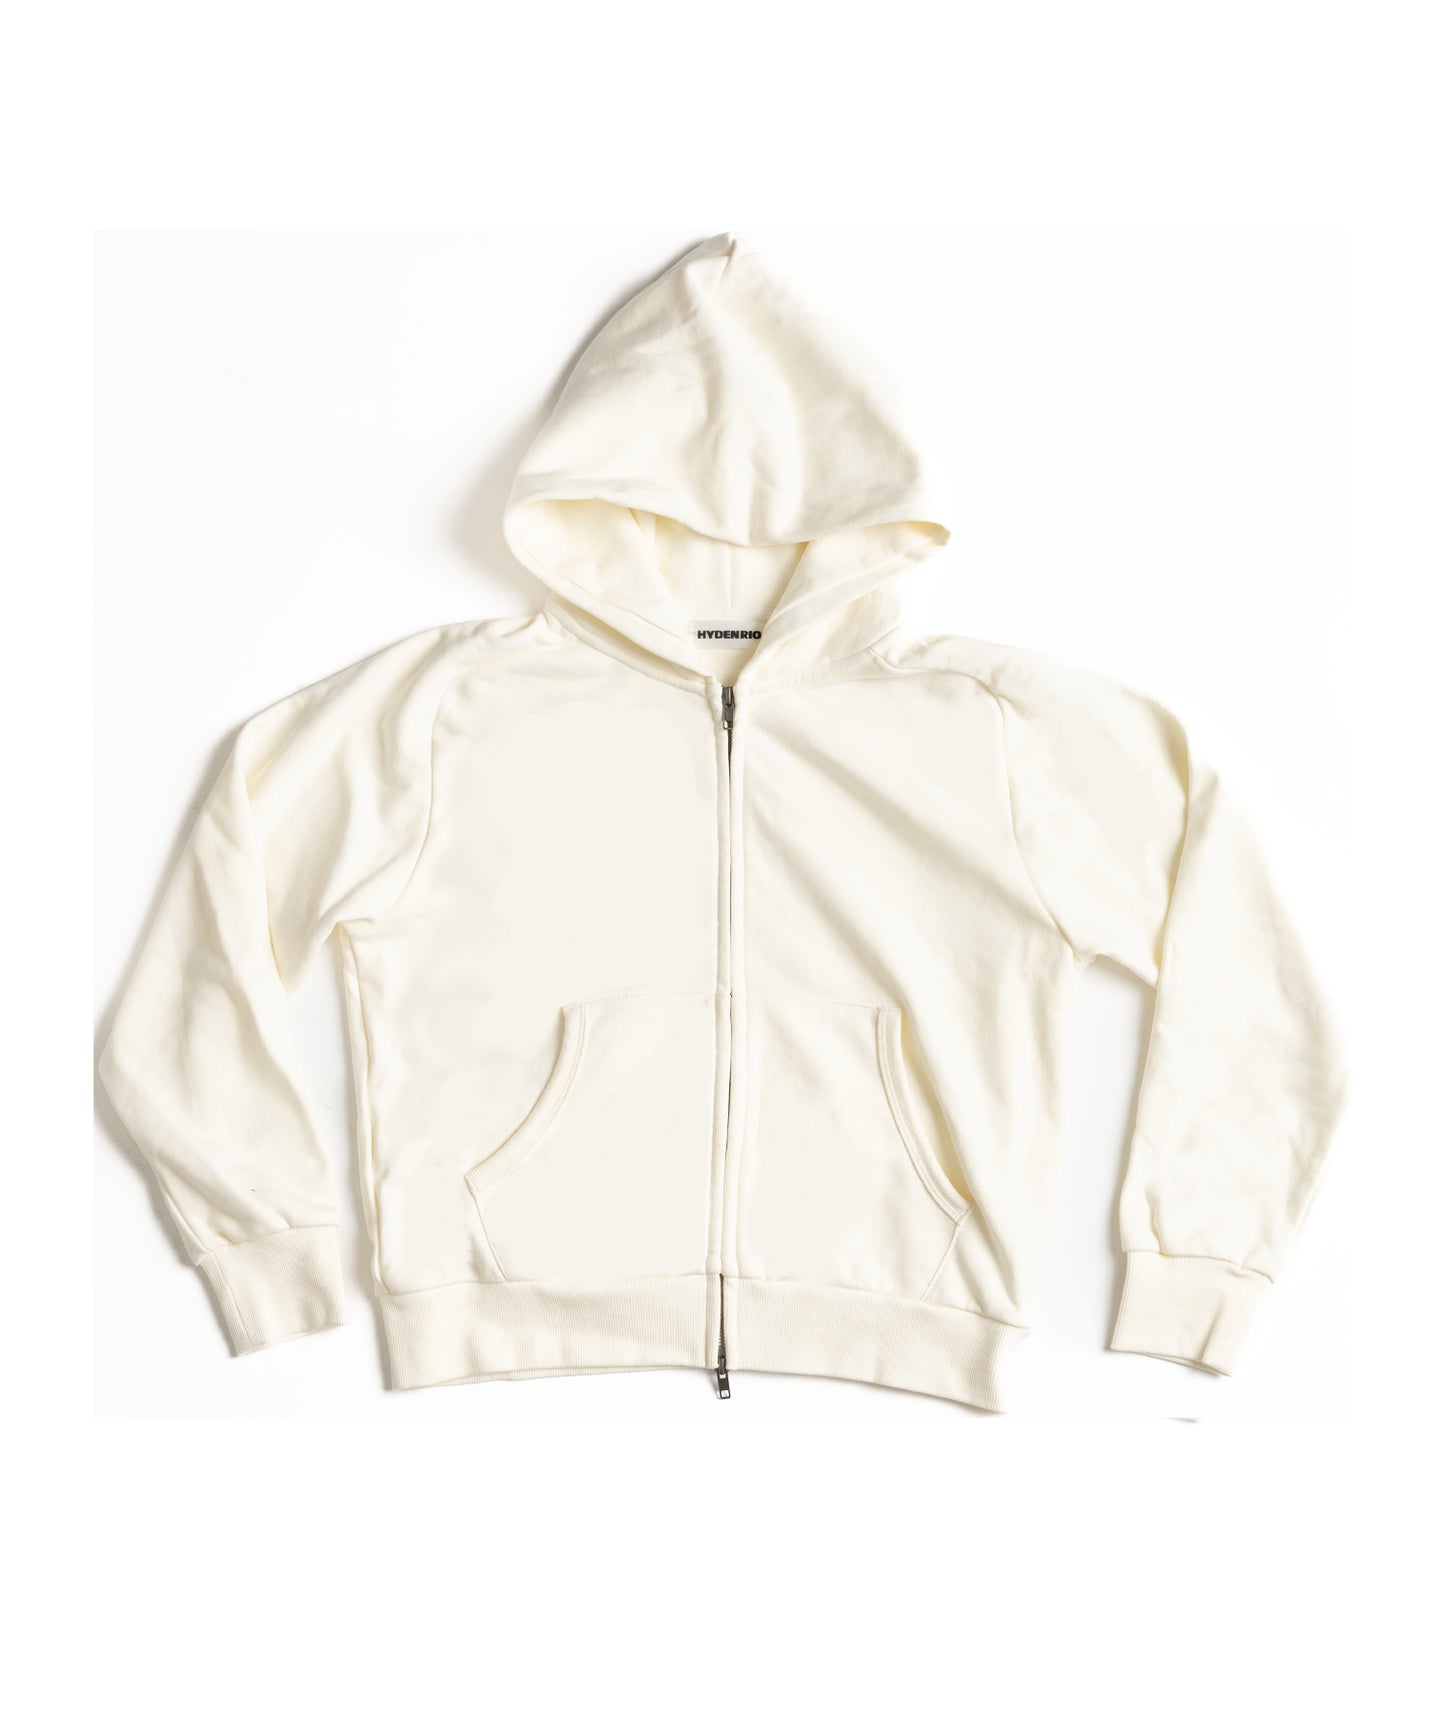 JUST FIT DOUBLE ZIPUP HOODIE ,WHITE